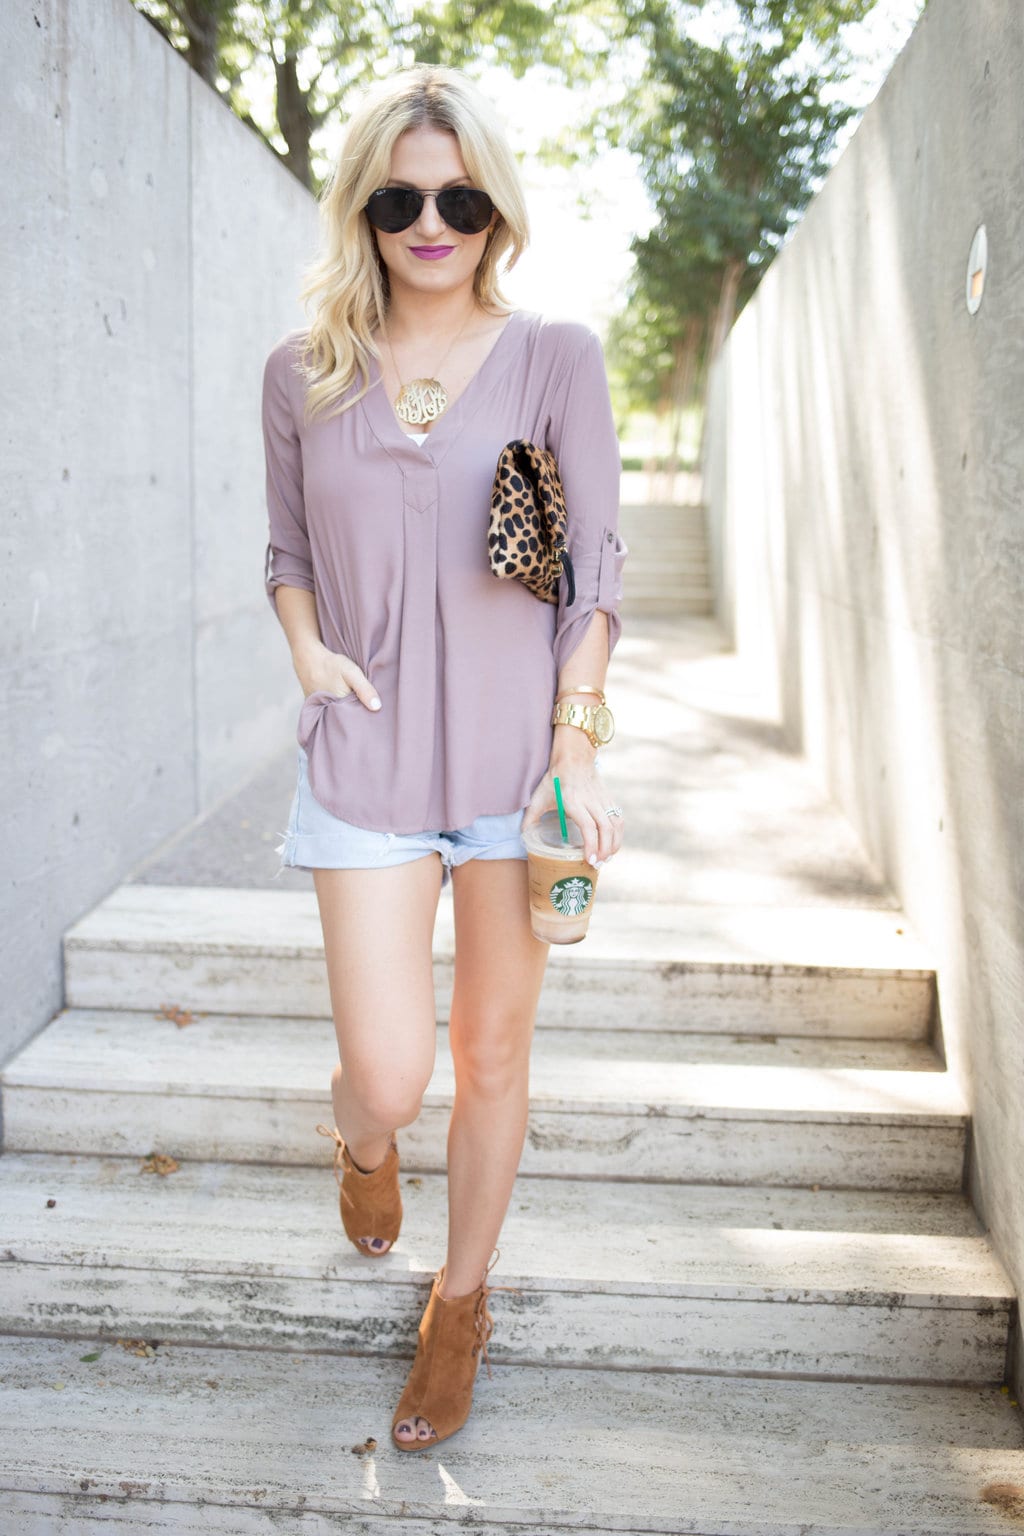 View More: http://madisonkatlinphotography.pass.us/kmoutfits